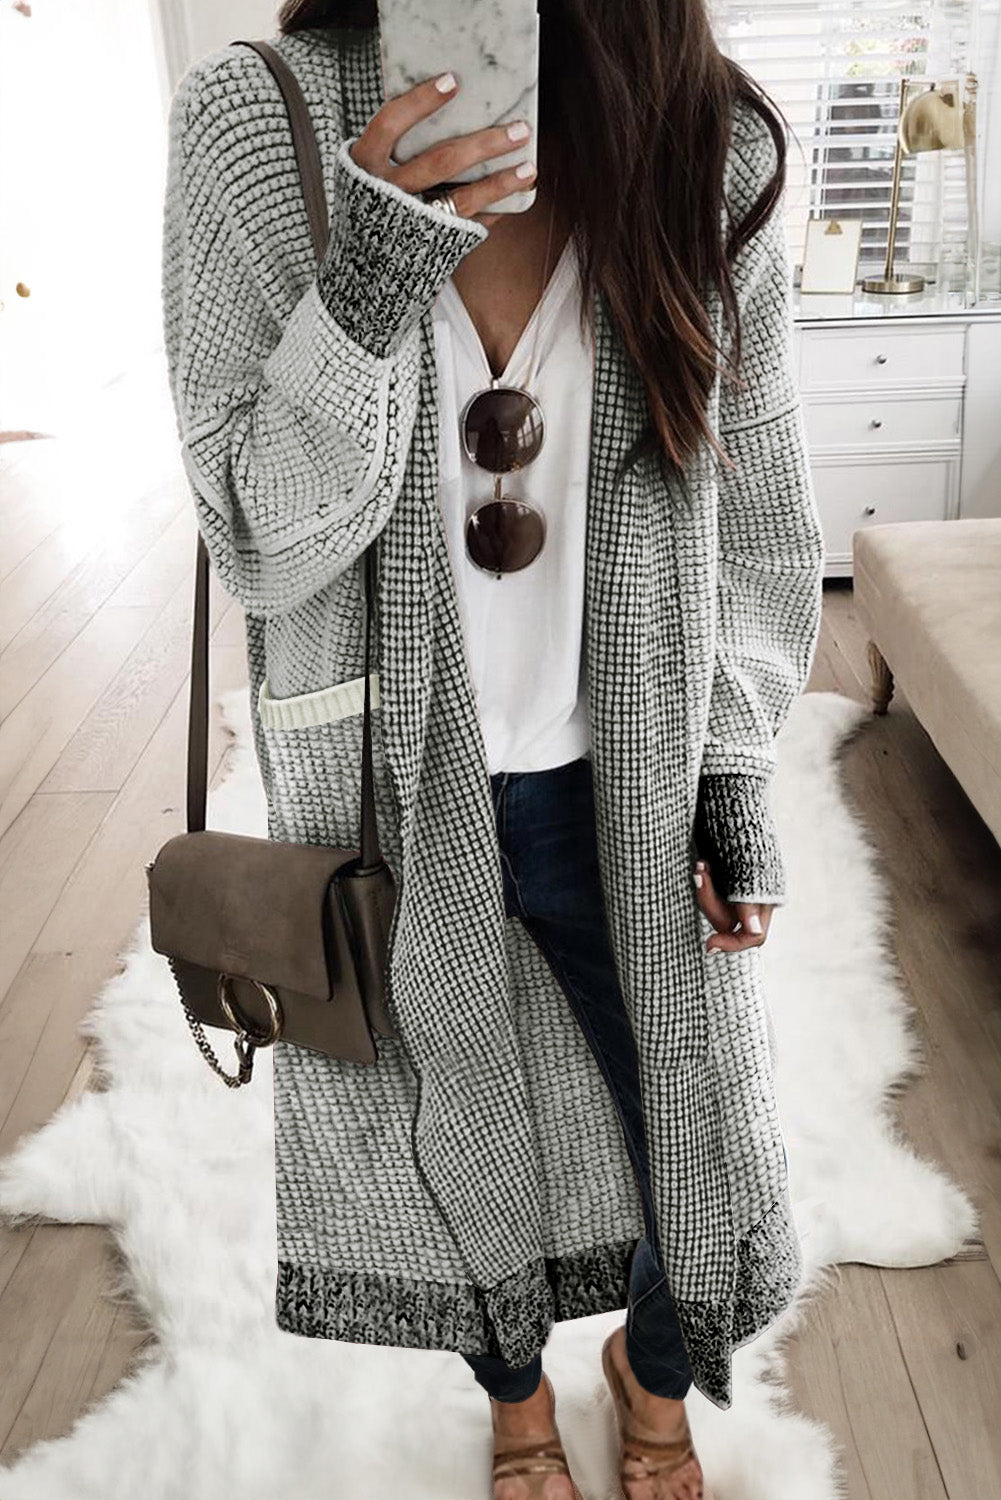 Gray Textured Knit Pocketed Duster Cardigan